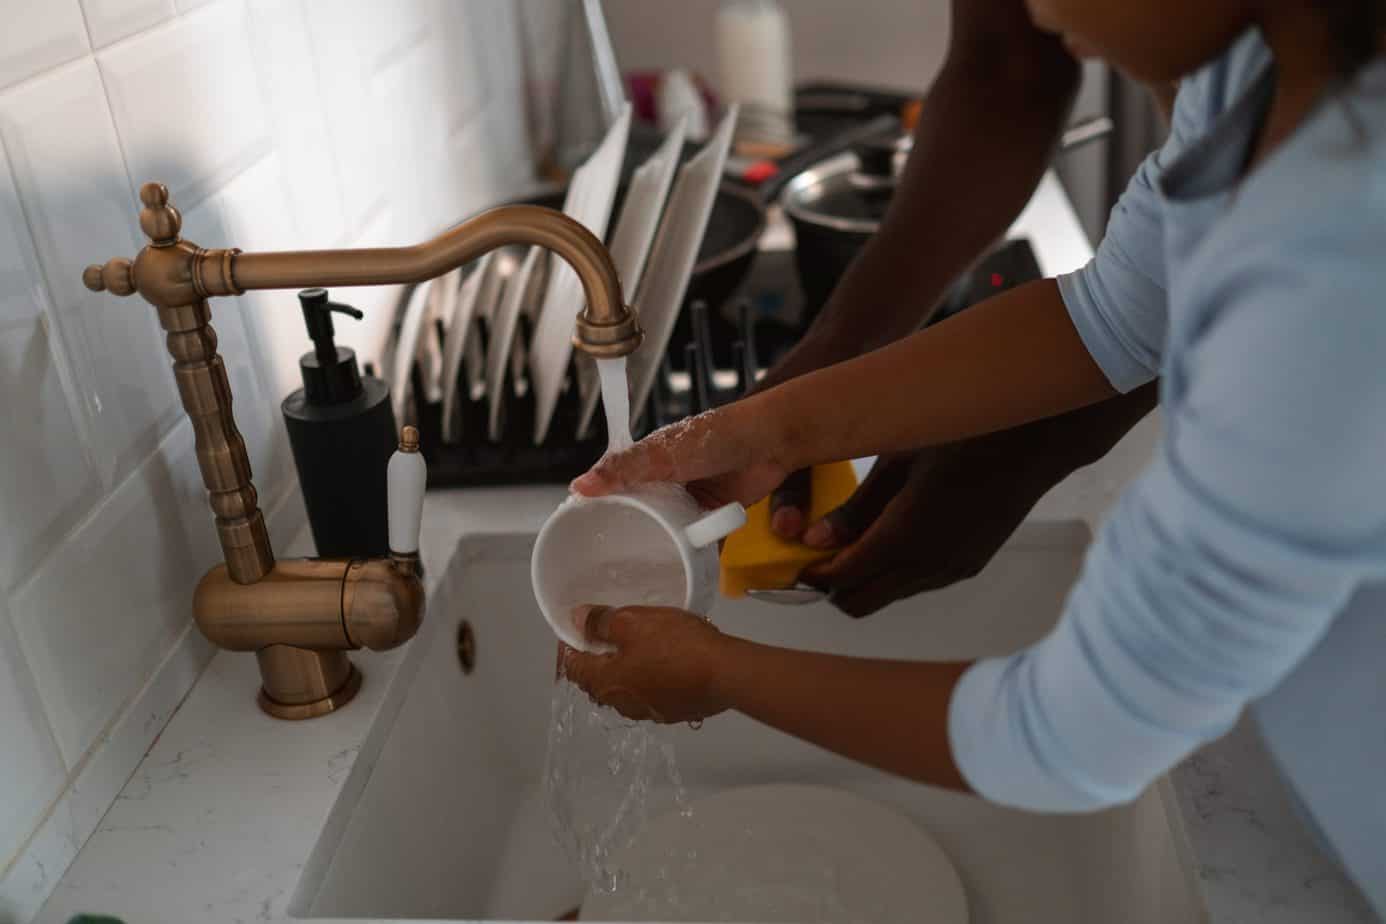 What is important in choosing a sink?